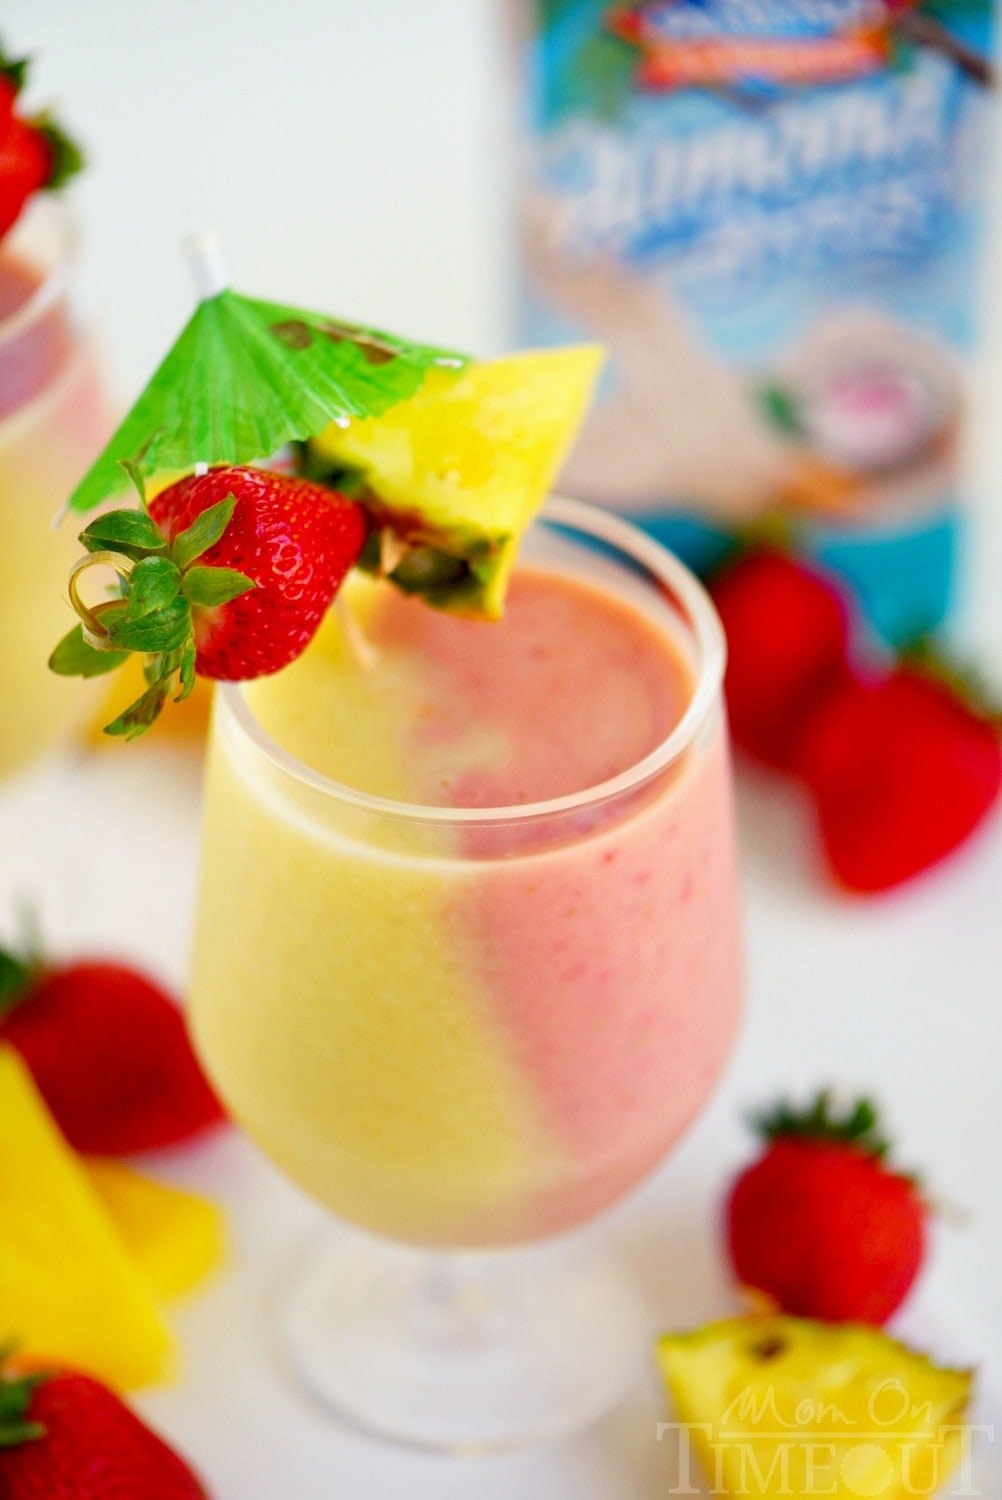 When the weather gets hot, turn to this Skinny Miami Vice Shake to cool off! And because you know your kids are going to want in on the action - I've included a kid-friendly version too!